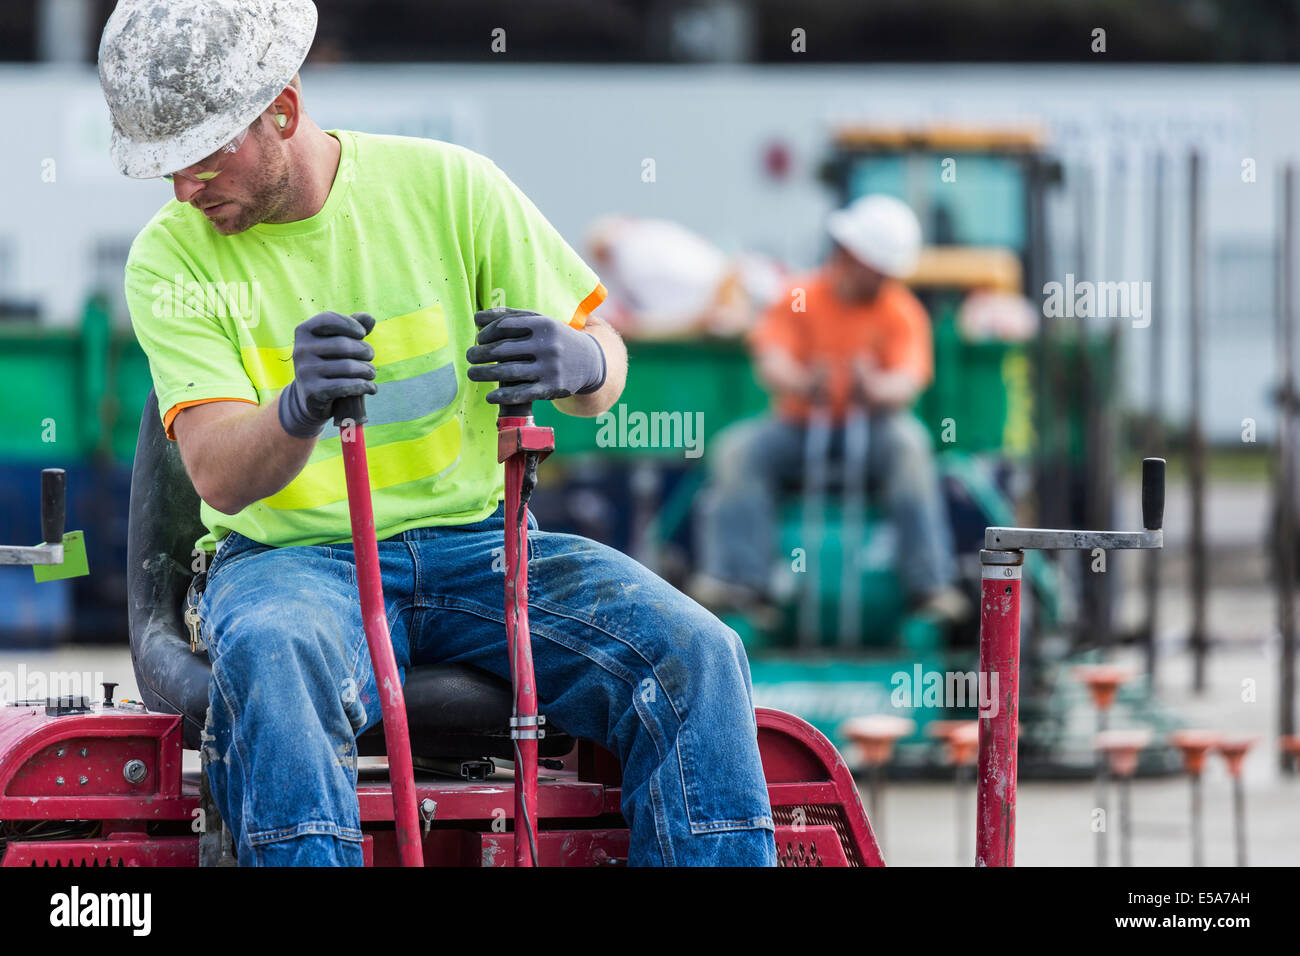 Worker operating machinery on construction site Stock Photo